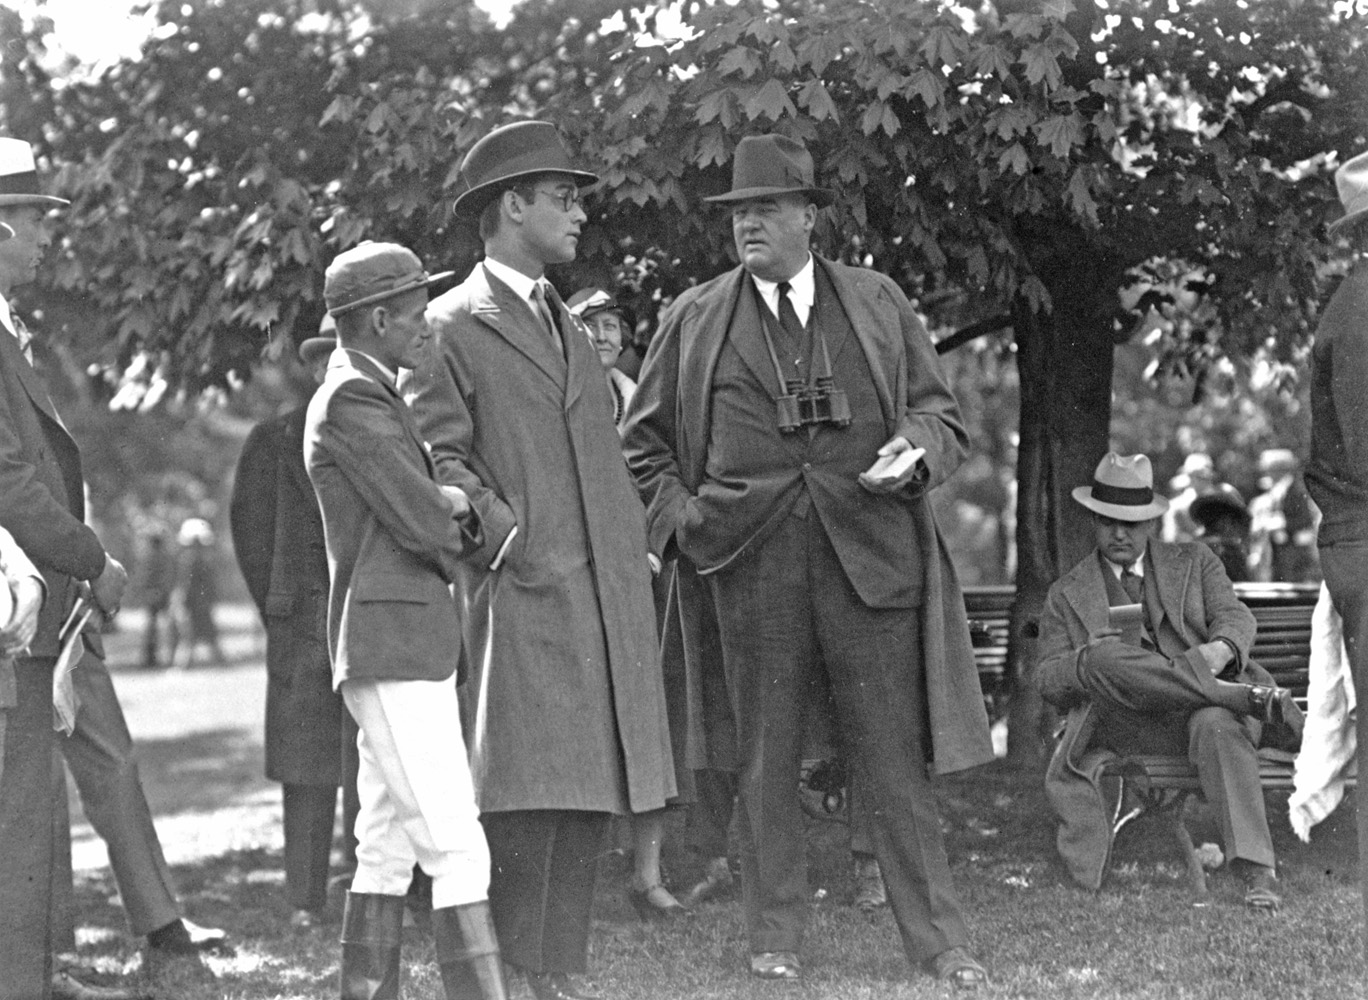 Jockey Lavelle Ensor, John Hay Whitney, and J. Healey (Keeneland Library Cook Collection/Museum Collection)